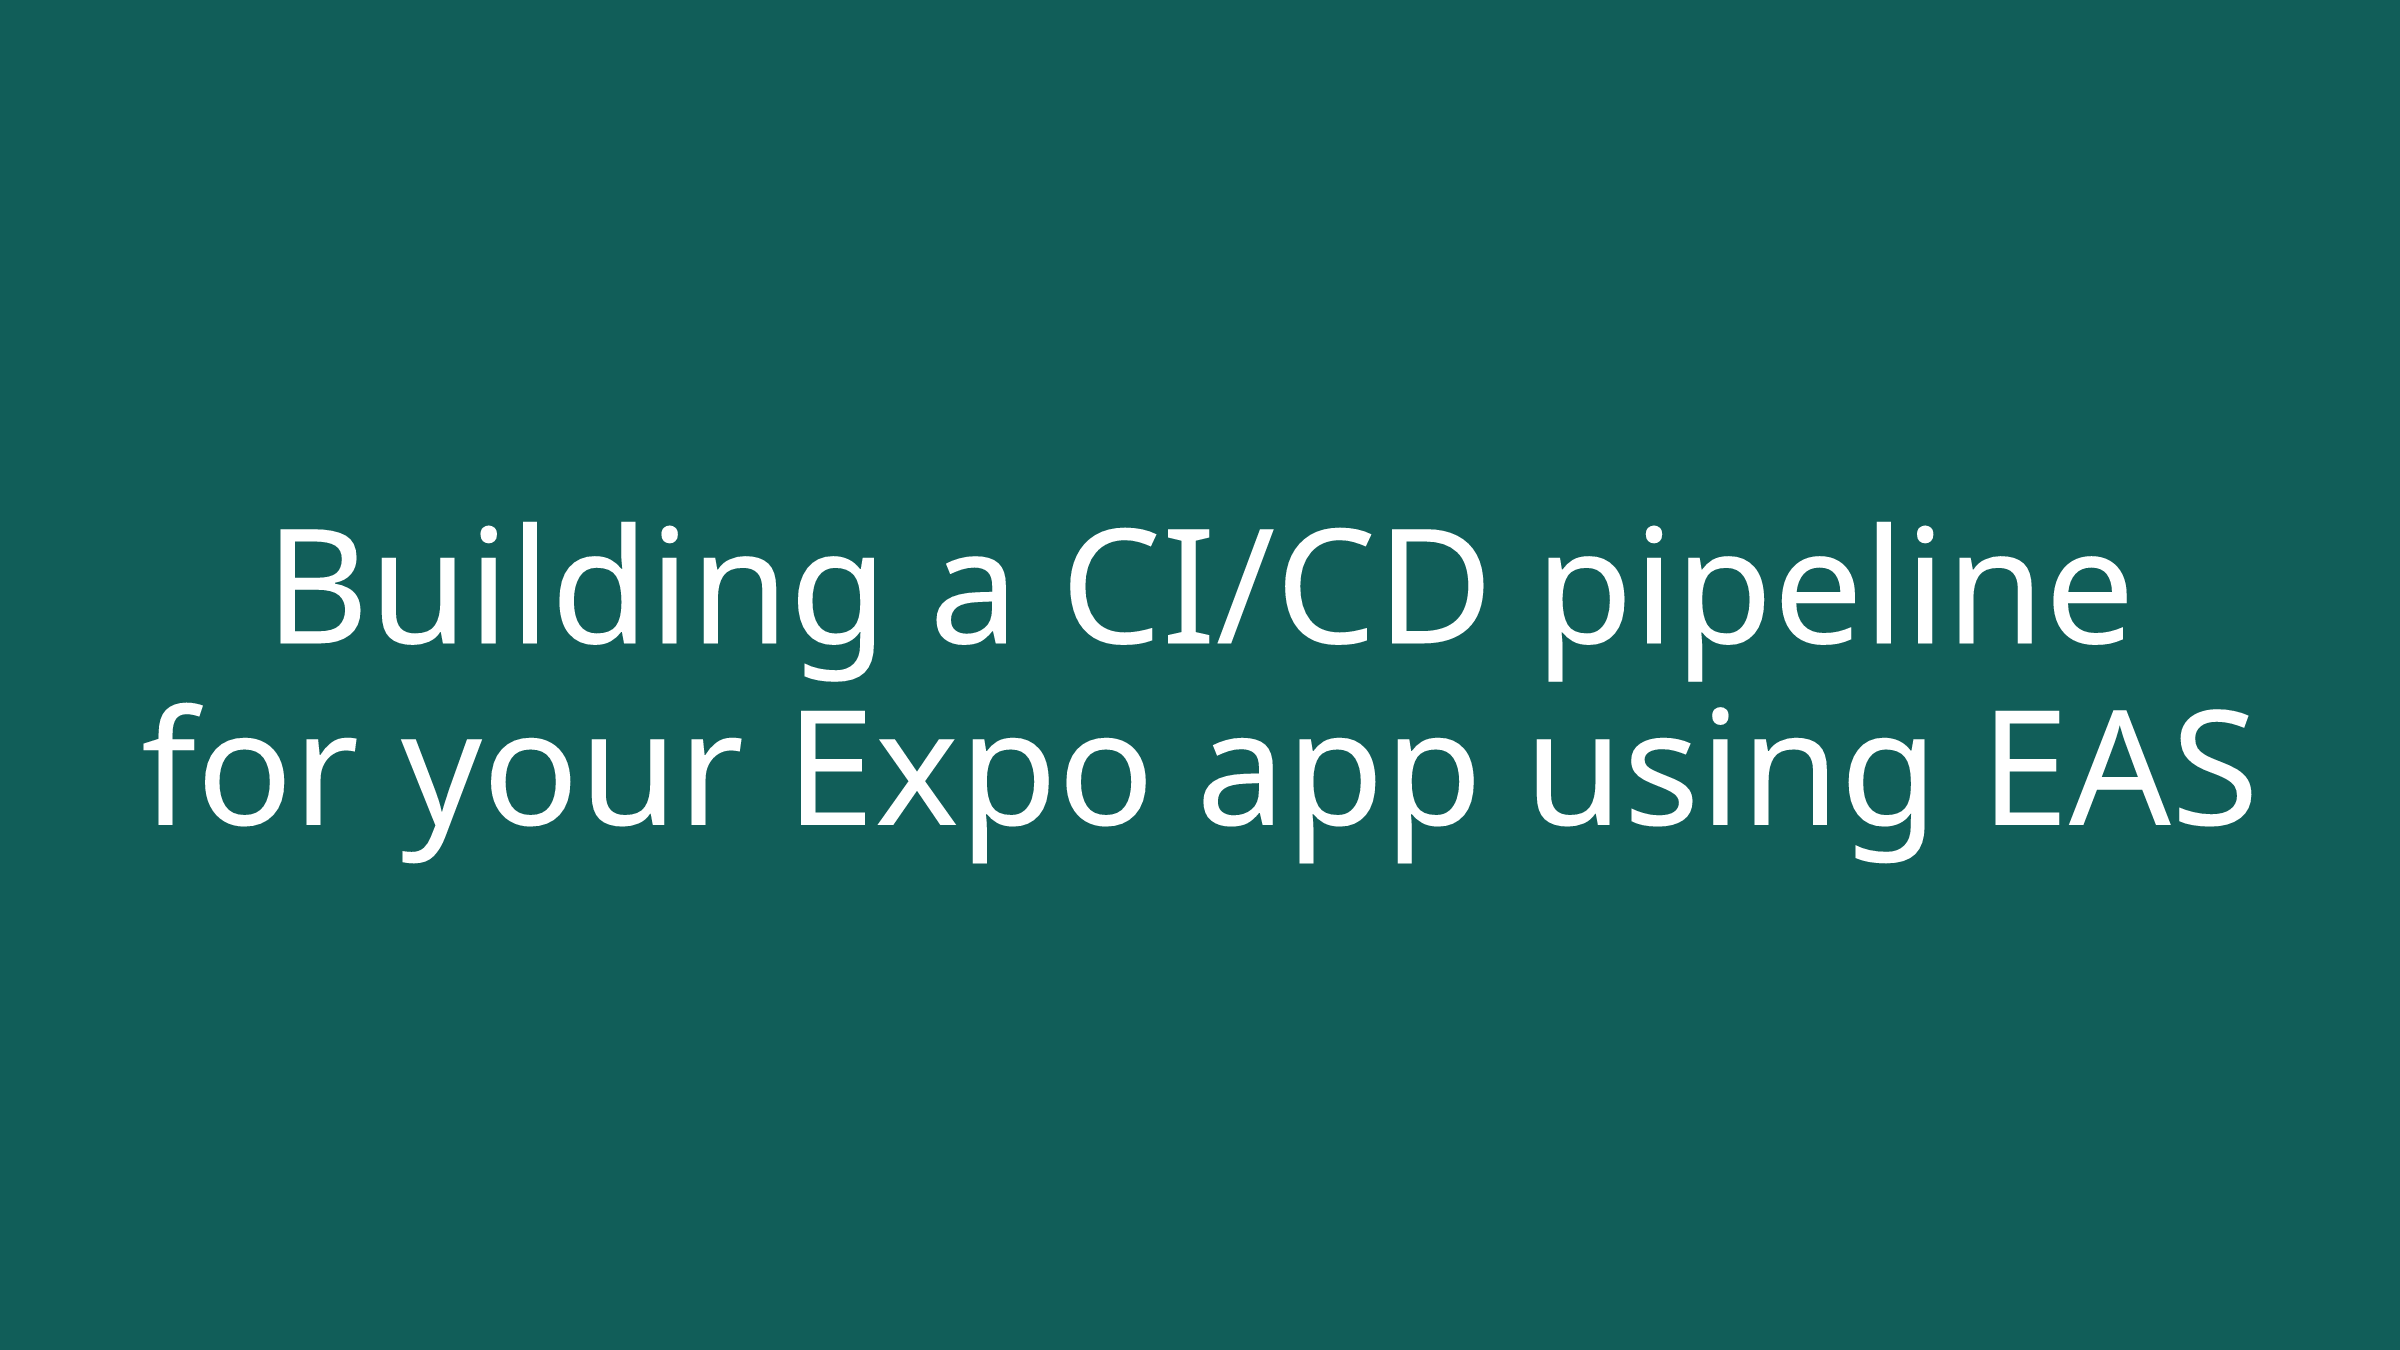 Building a CI/CD pipeline for your Expo app using EAS